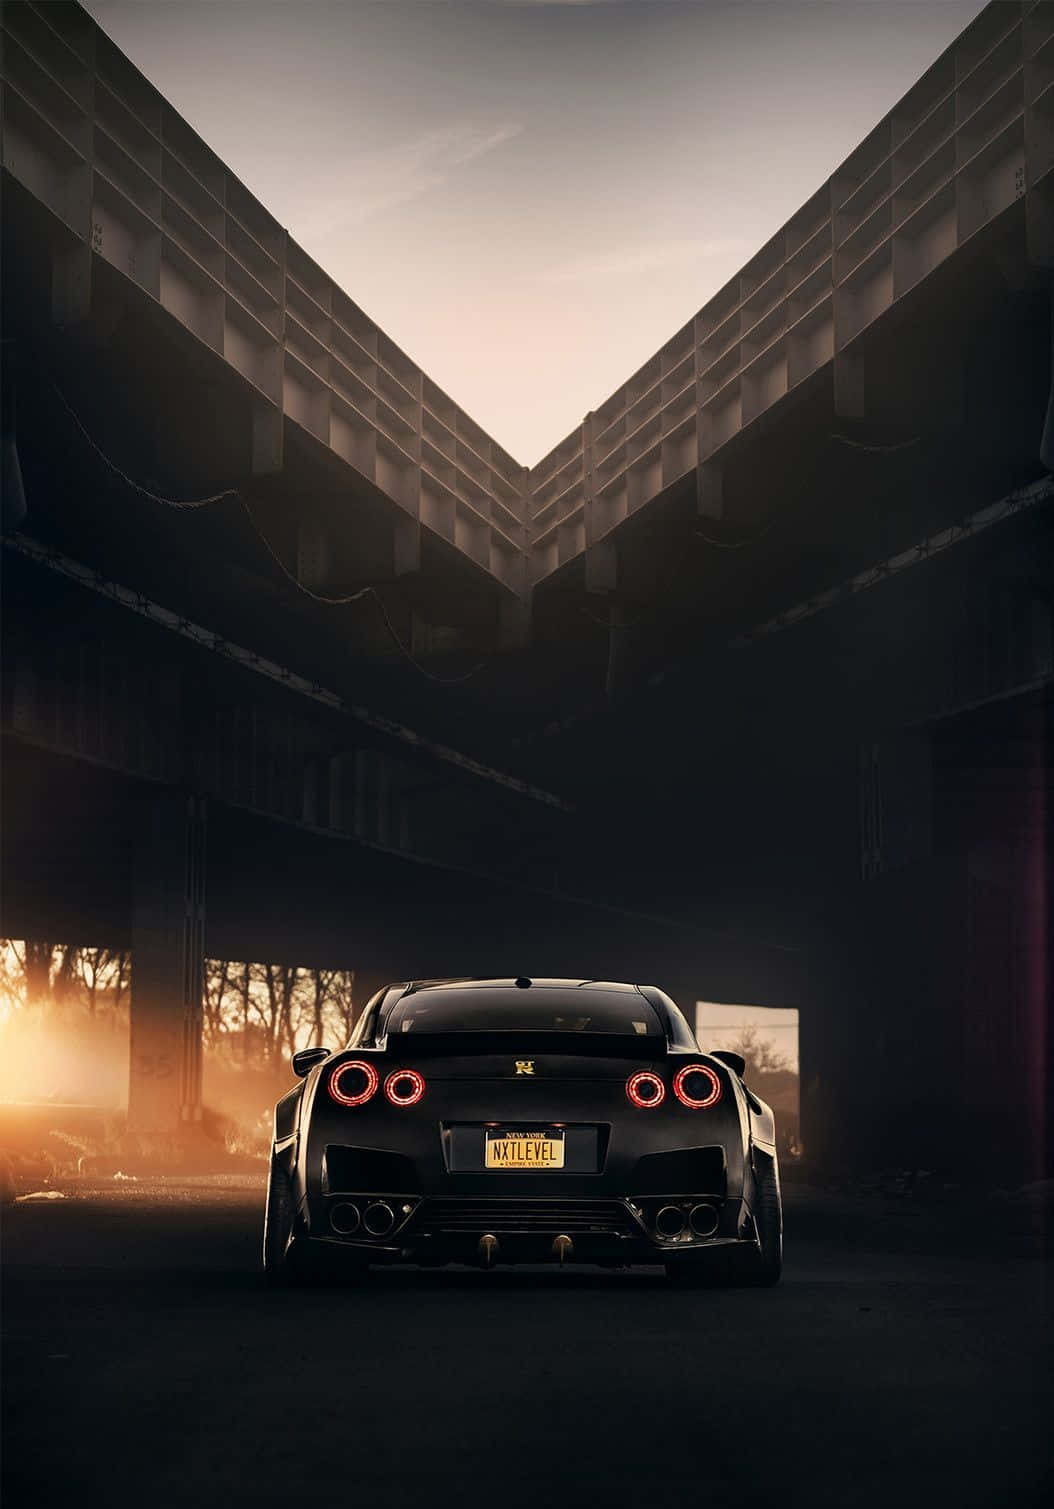 Cars Wallpapers  Page 11 of 28  iPhone Wallpapers  iPhone Wallpapers  Nissan  gtr wallpapers Nissan gtr Gtr iphone wallpaper